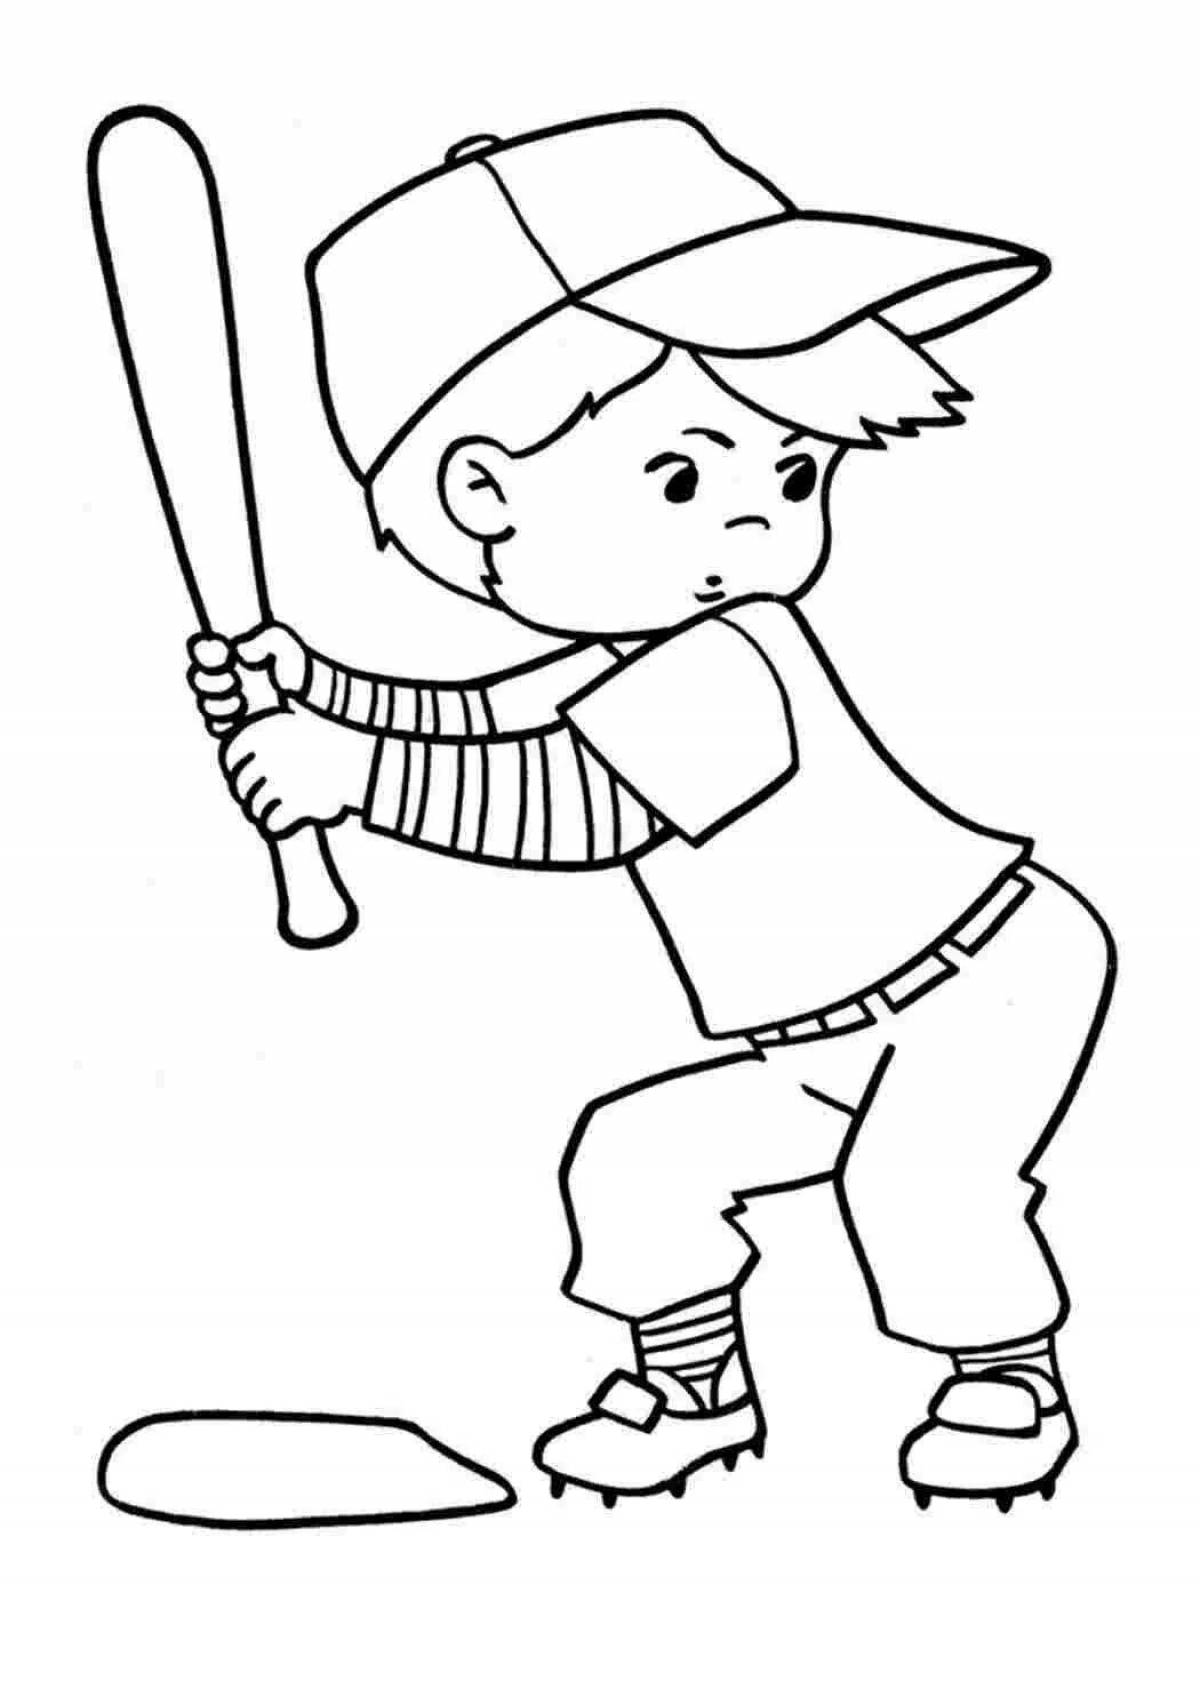 Amazing sports coloring book for kids 6-7 years old